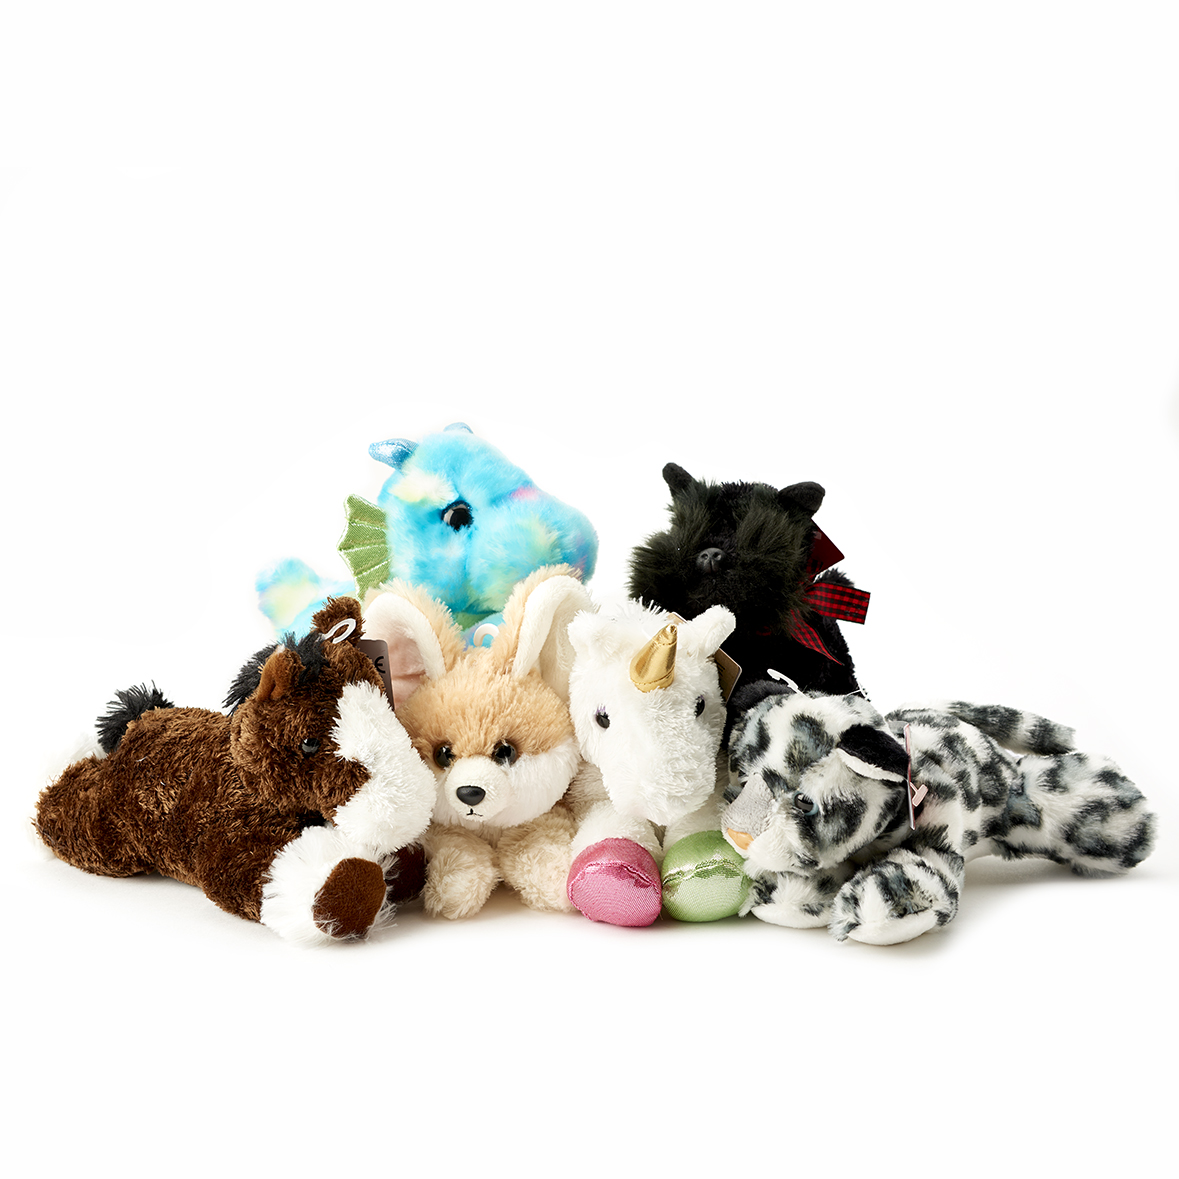 Stuffed Animal Collection - The Chocolate Therapist